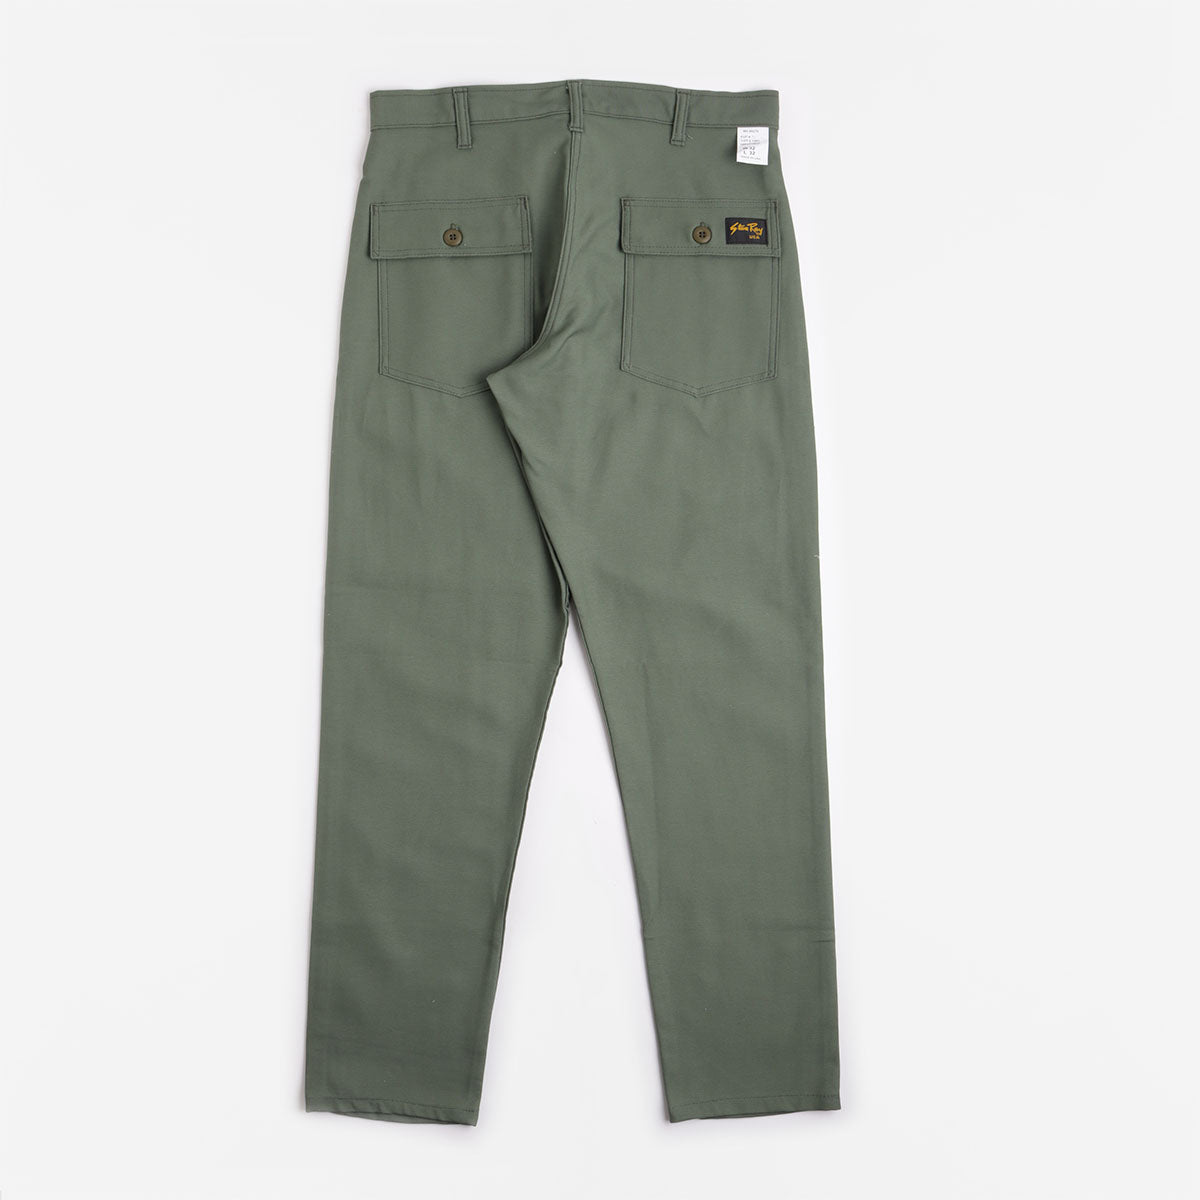 Stan Ray Slim Fit 4 Pocket Fatigue Pant - 1300 series, Olive Sateen, Detail Shot 3